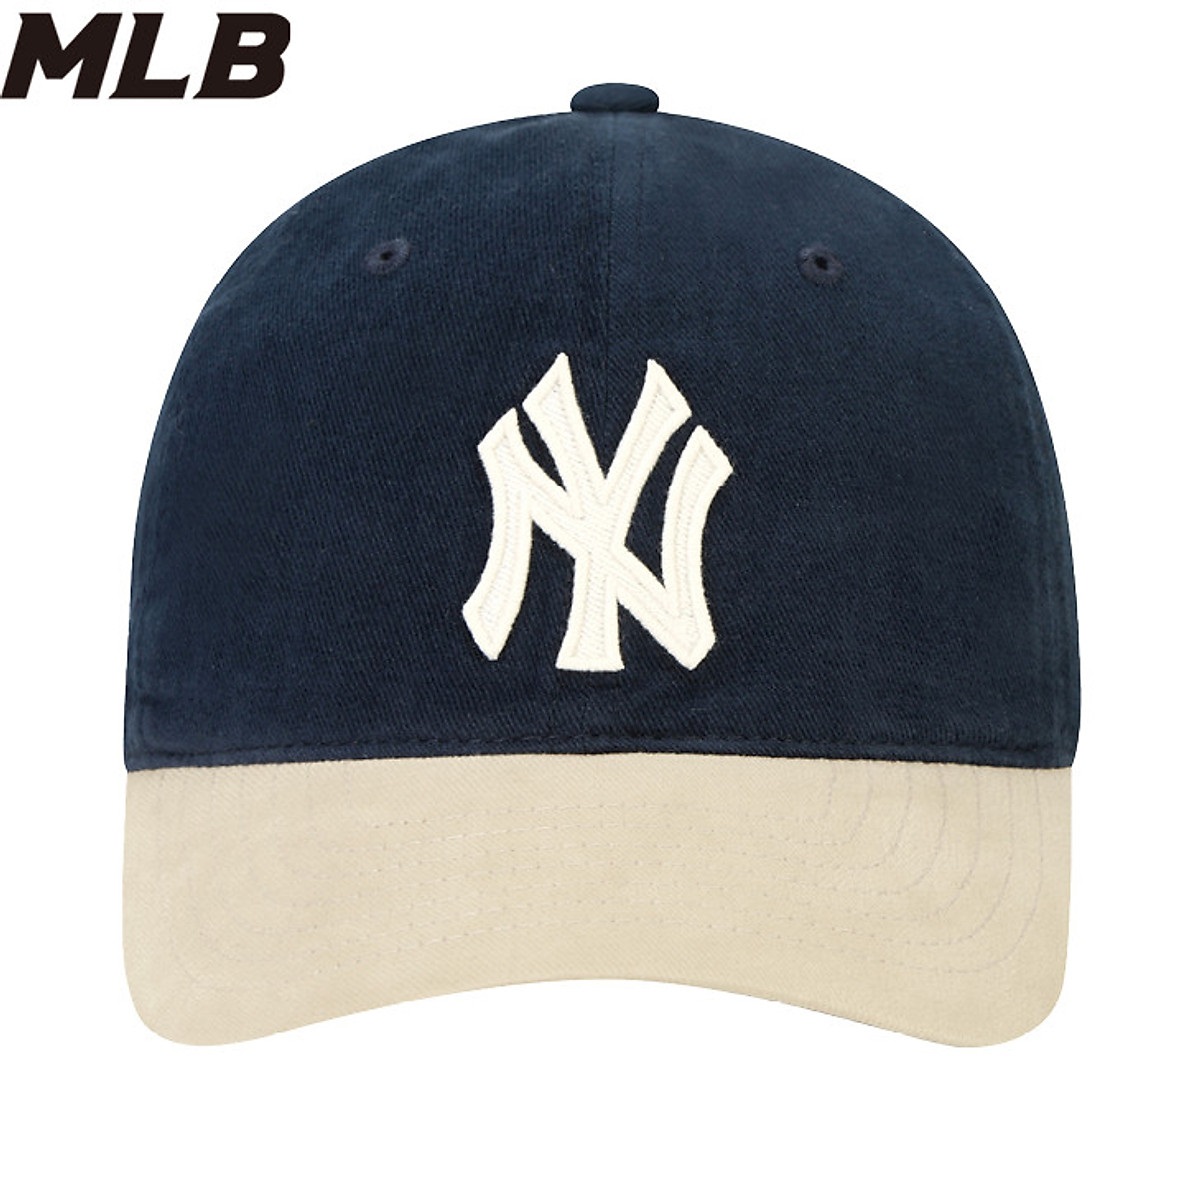 MŨ UNISEX MLB COLOR MATCHING N-COVER BALL CAP NEW YORK YANKEES 14